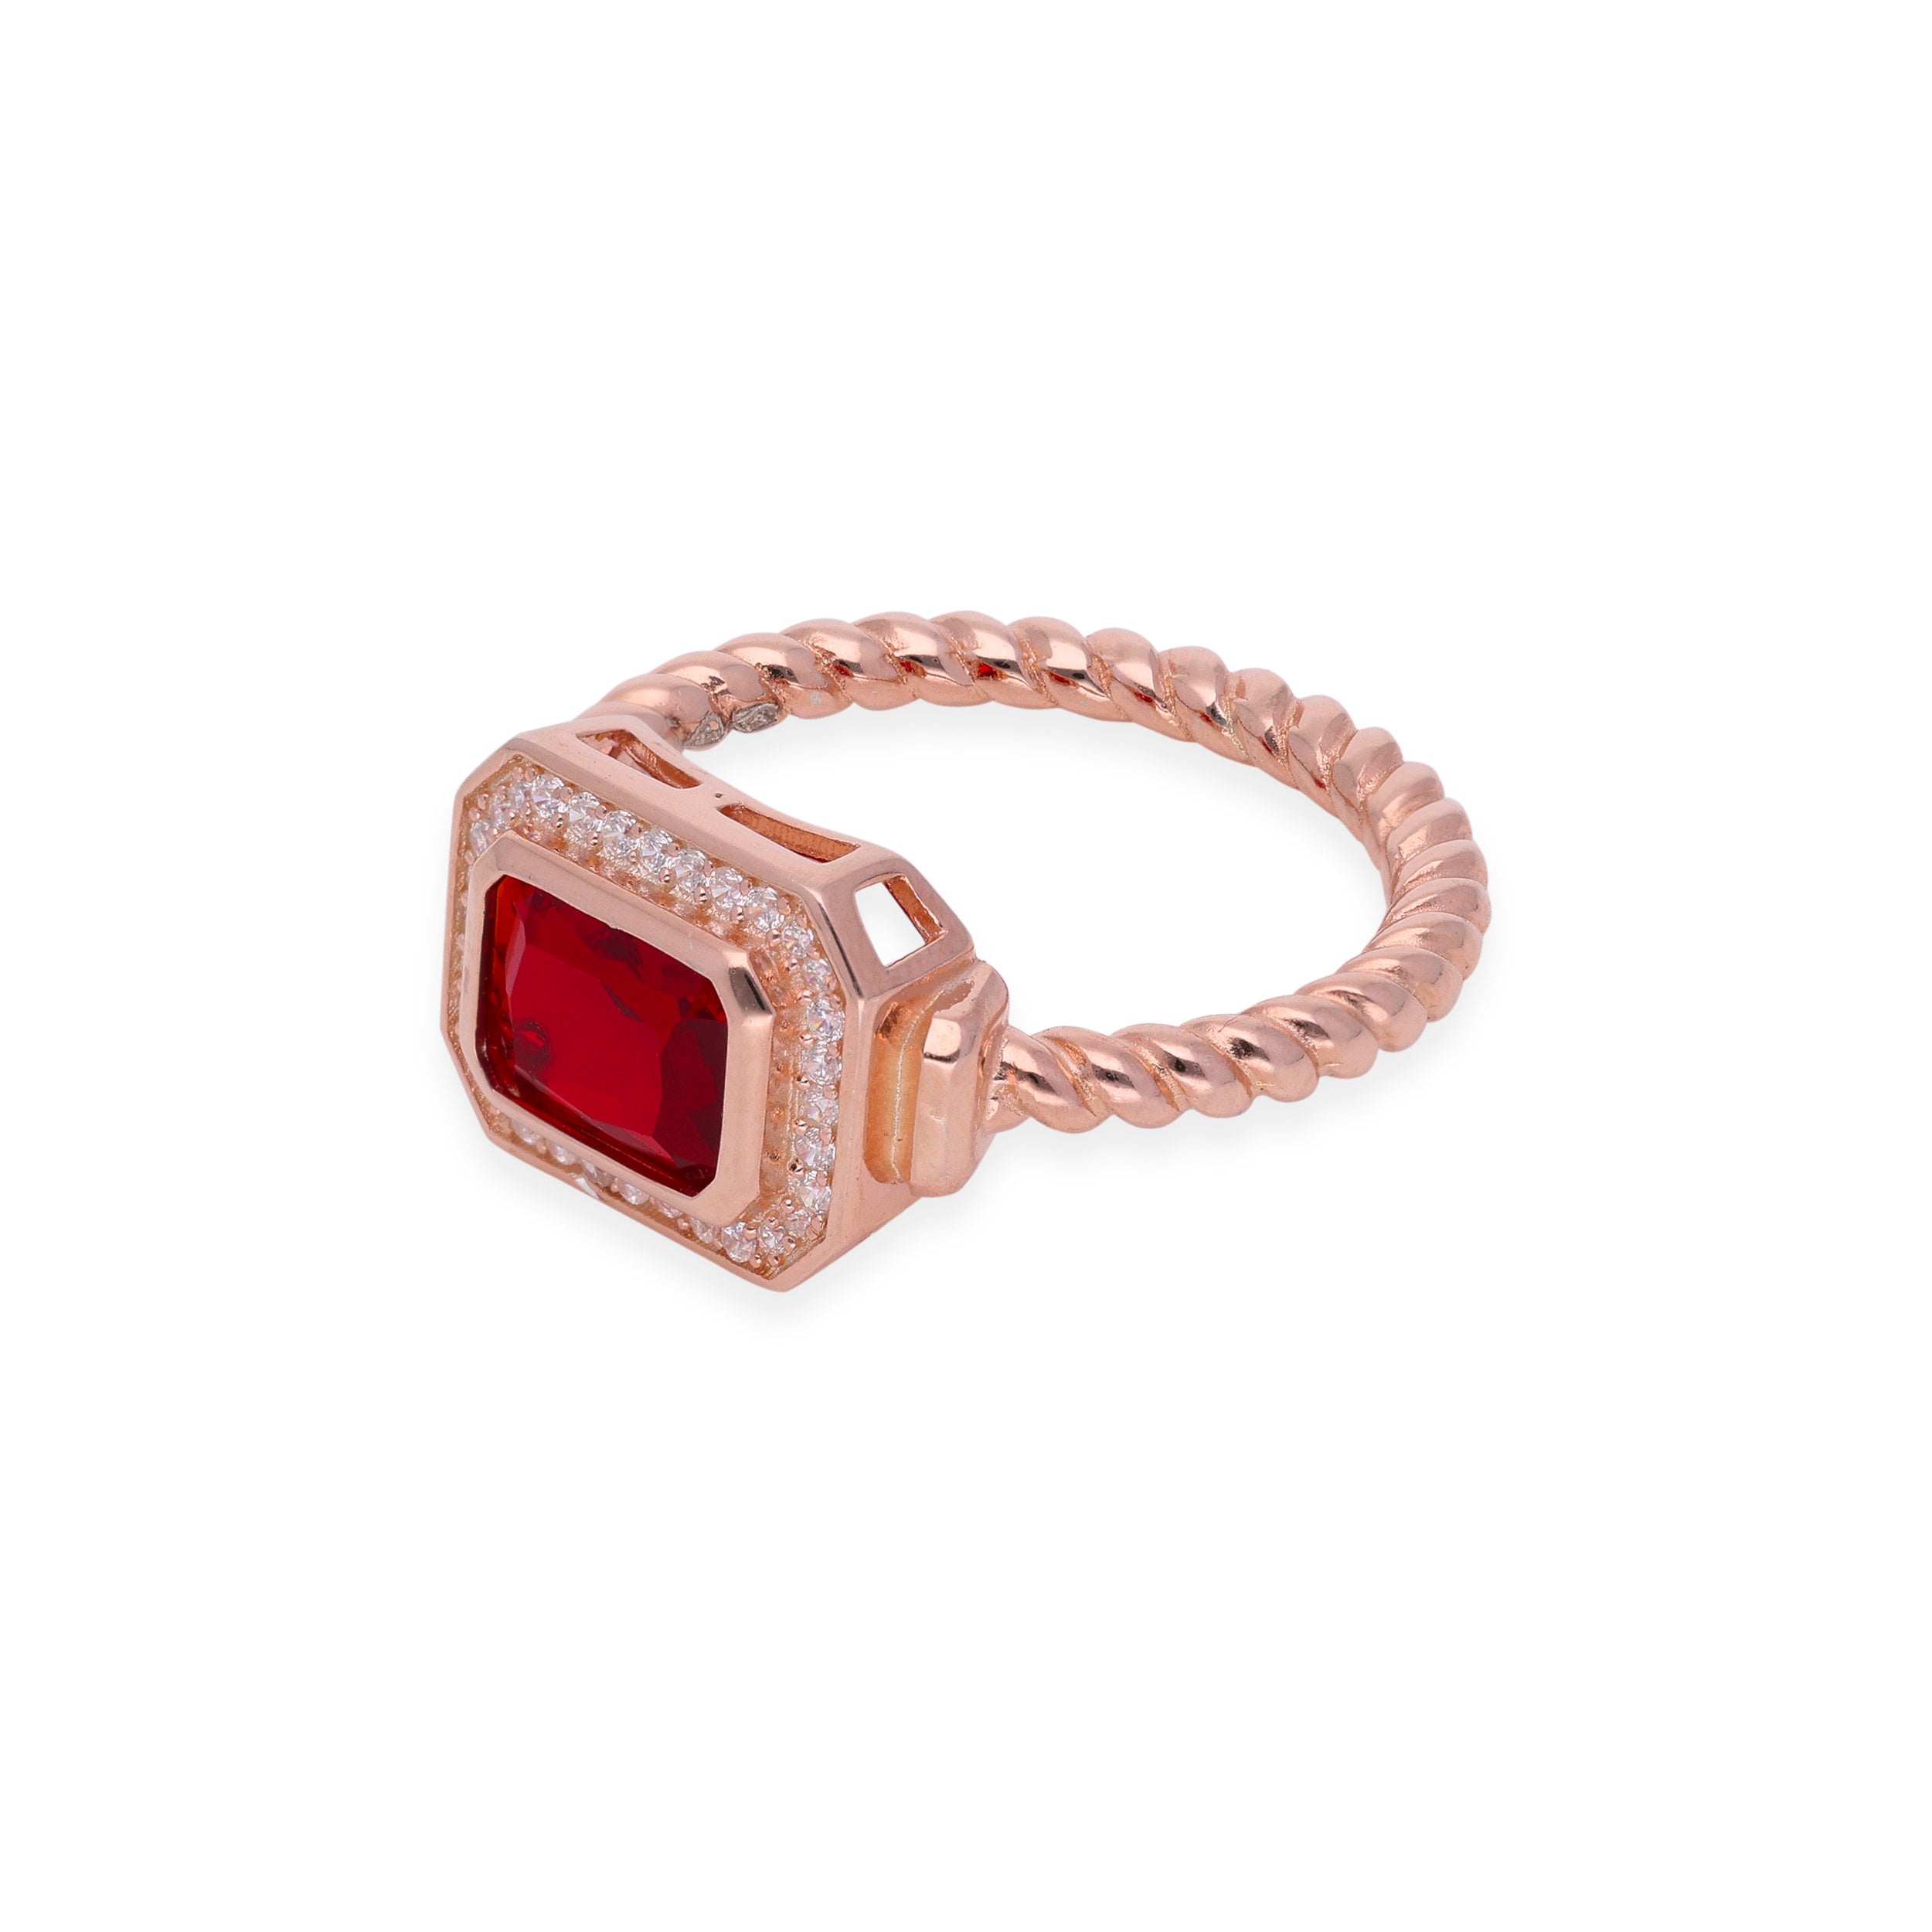 Rose Gold Twisted Band Ring with Red Gemstone and Diamond Halo | SKU : 0003114766